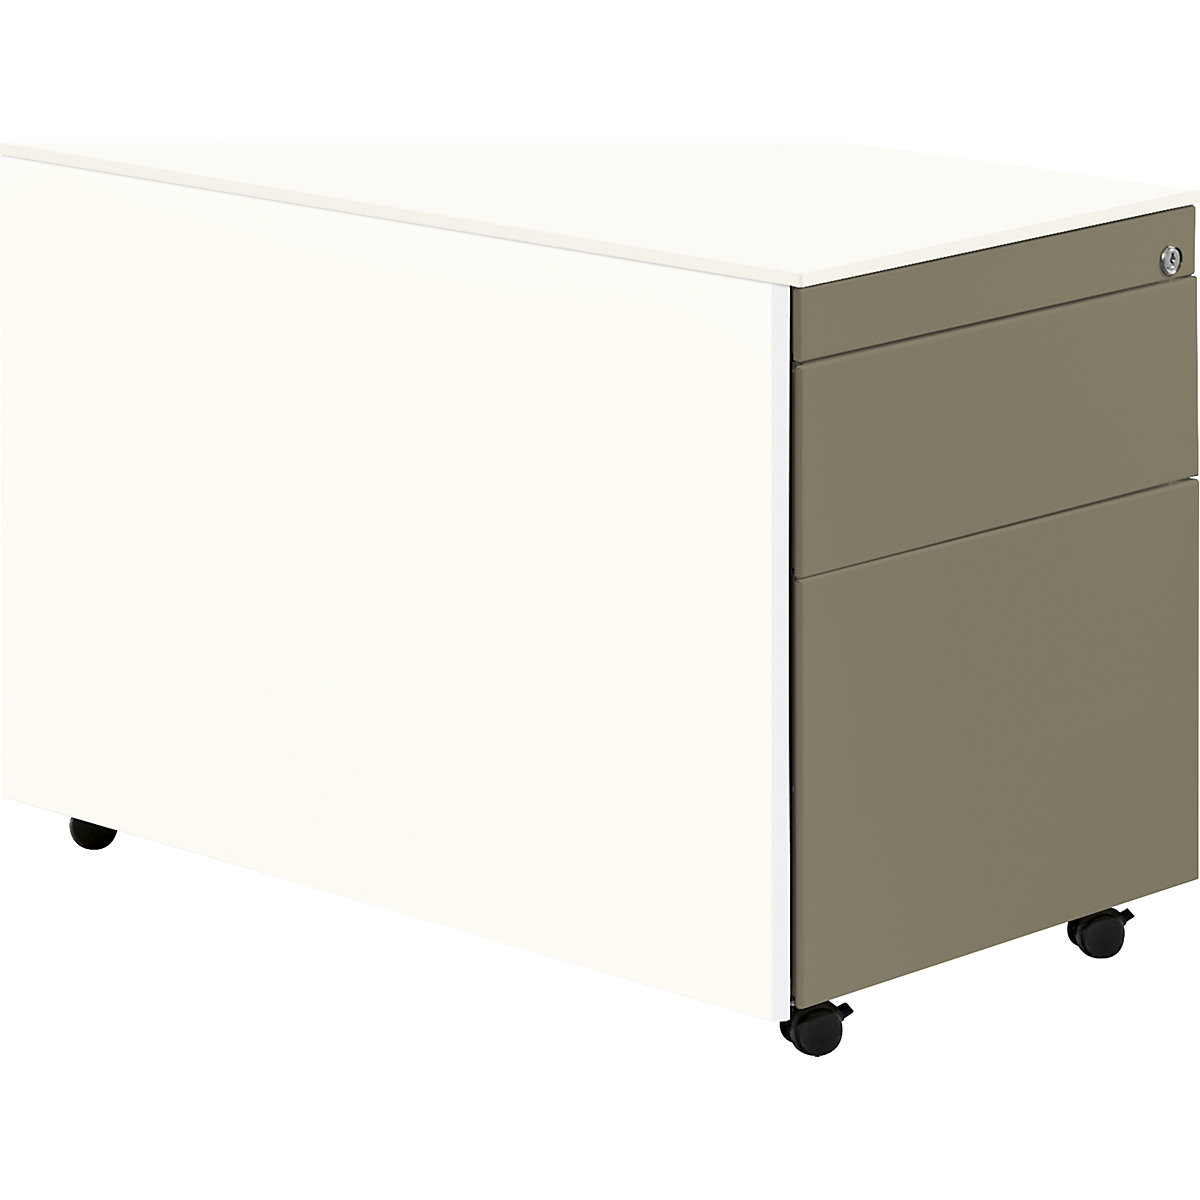 Drawer pedestal with castors – mauser, HxD 570 x 800 mm, 1 drawer, 1 suspension file drawer, pure white / beige grey / pure white-5